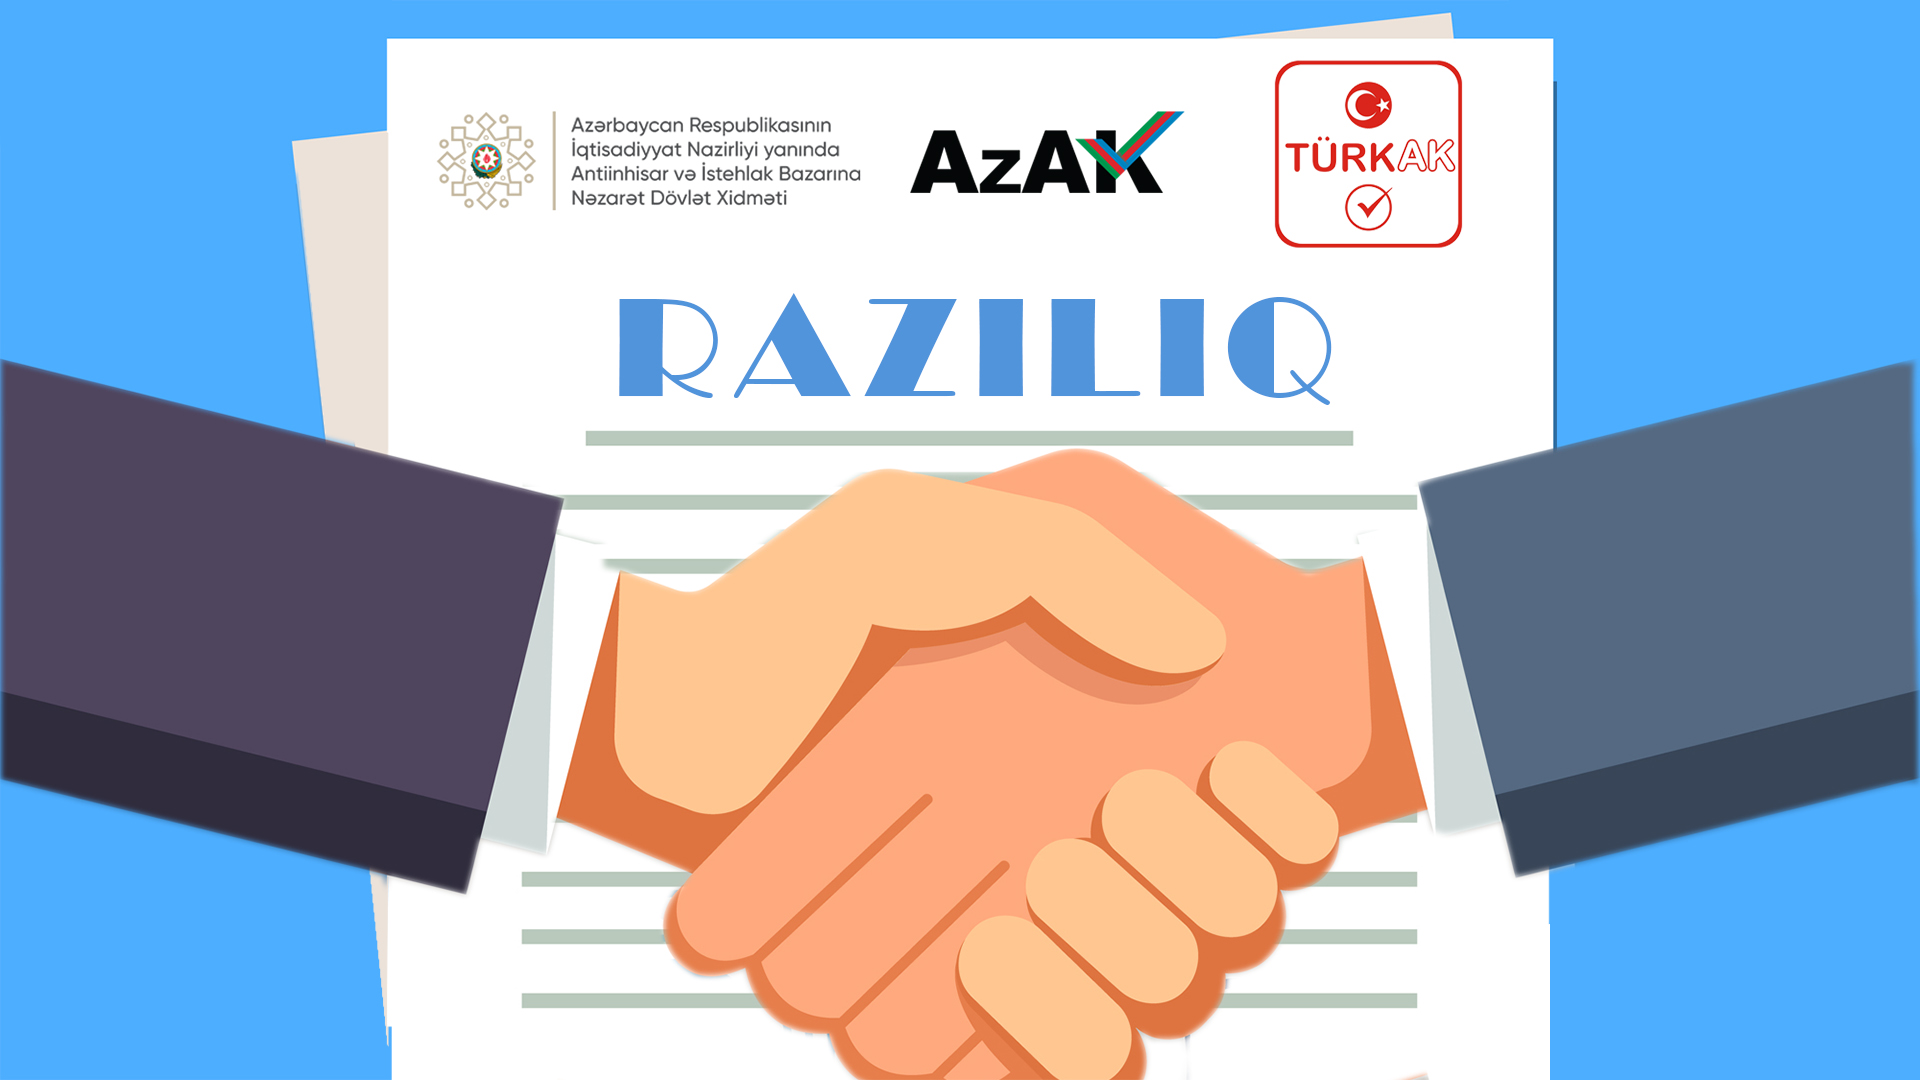 An agreement has been signed on consulting and training in the field of quality infrastructure